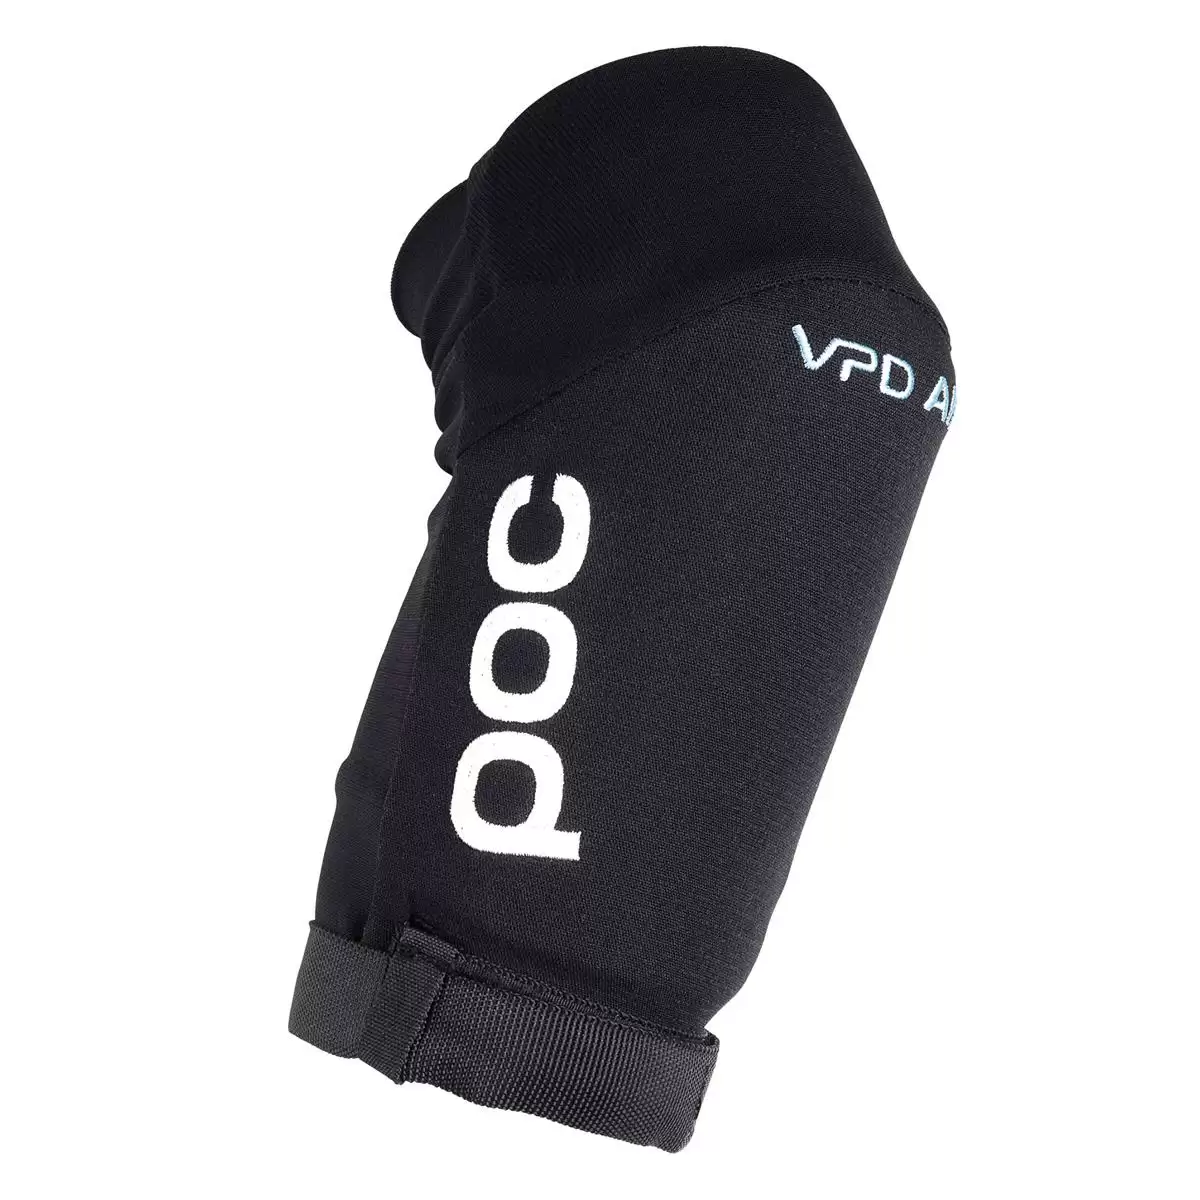 Joint VPD Air Elbow Black Size L - image